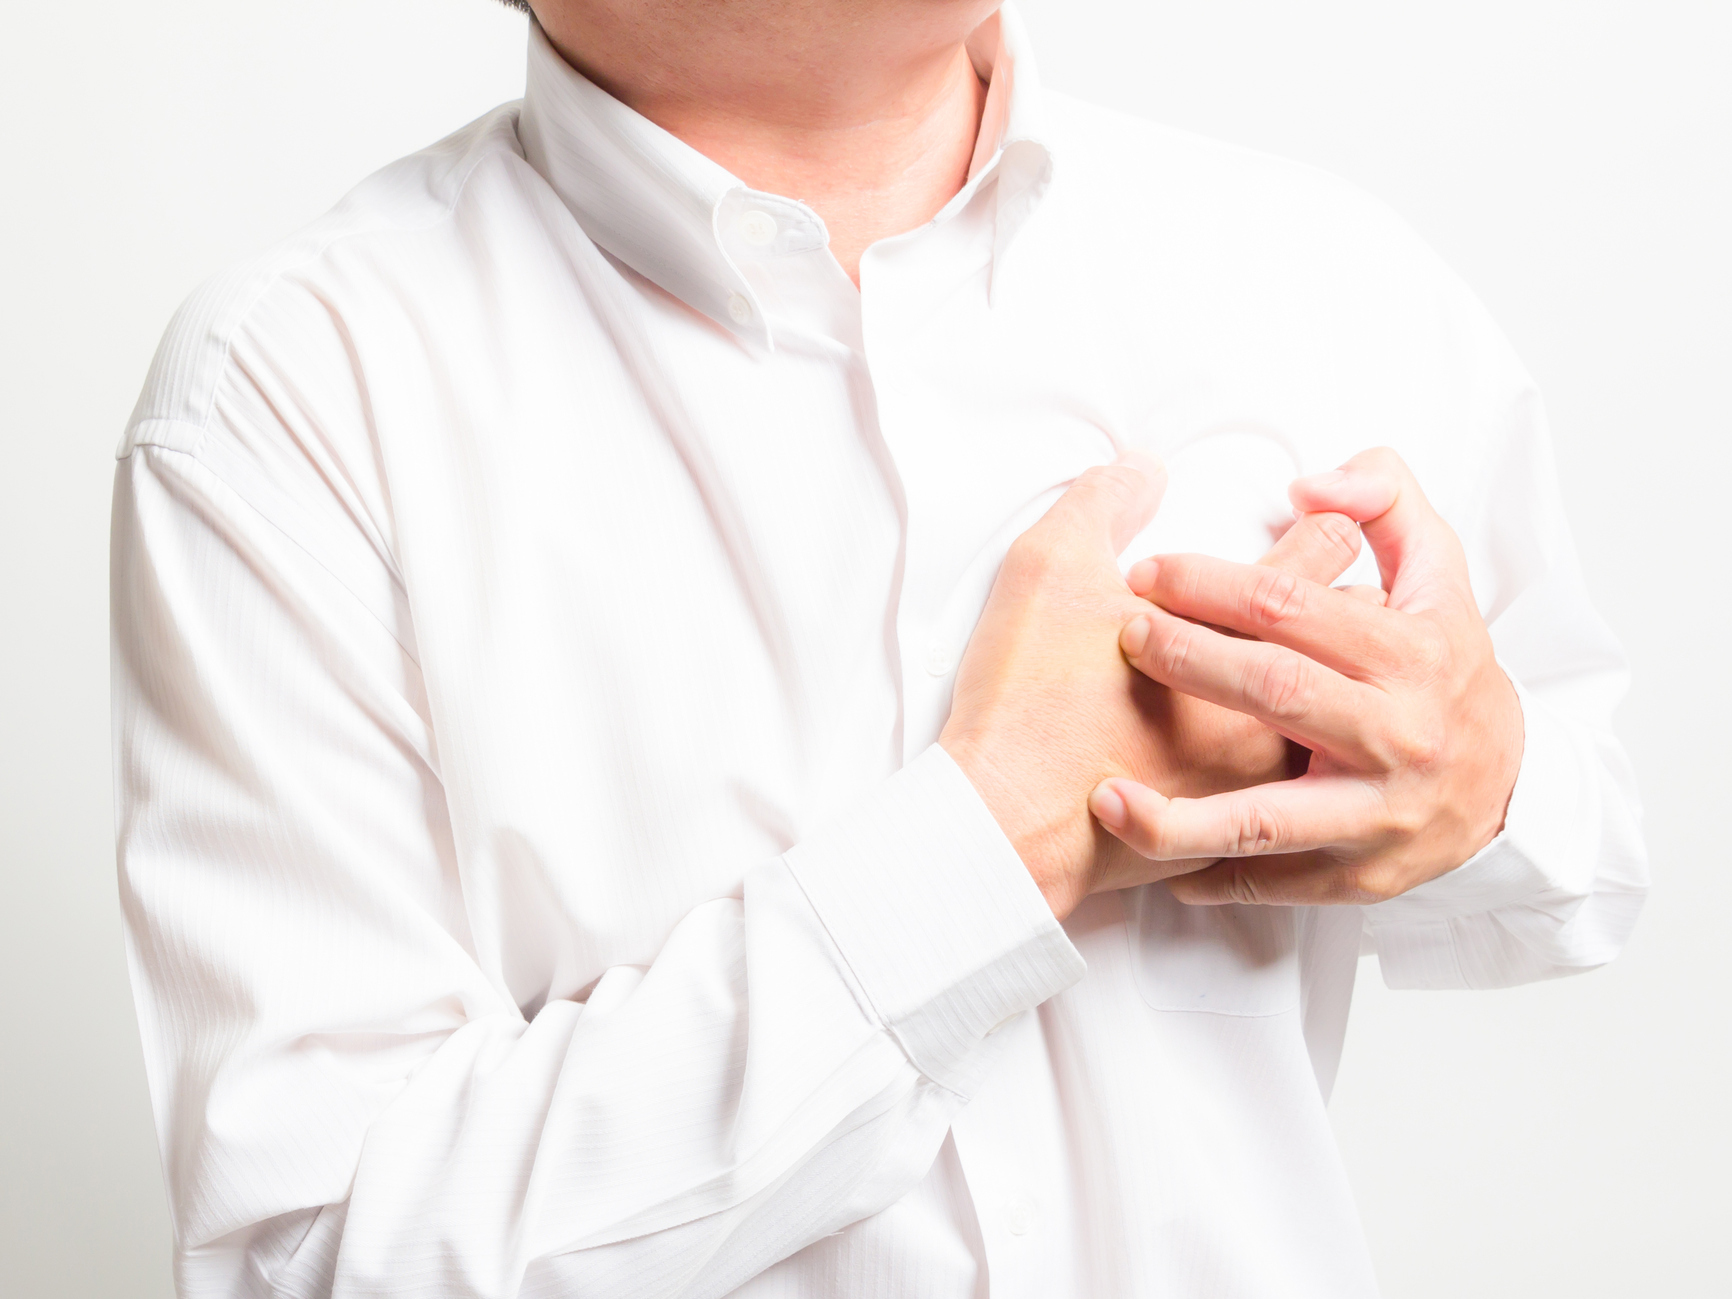 When are you most likely to suffer sudden cardiac arrest?